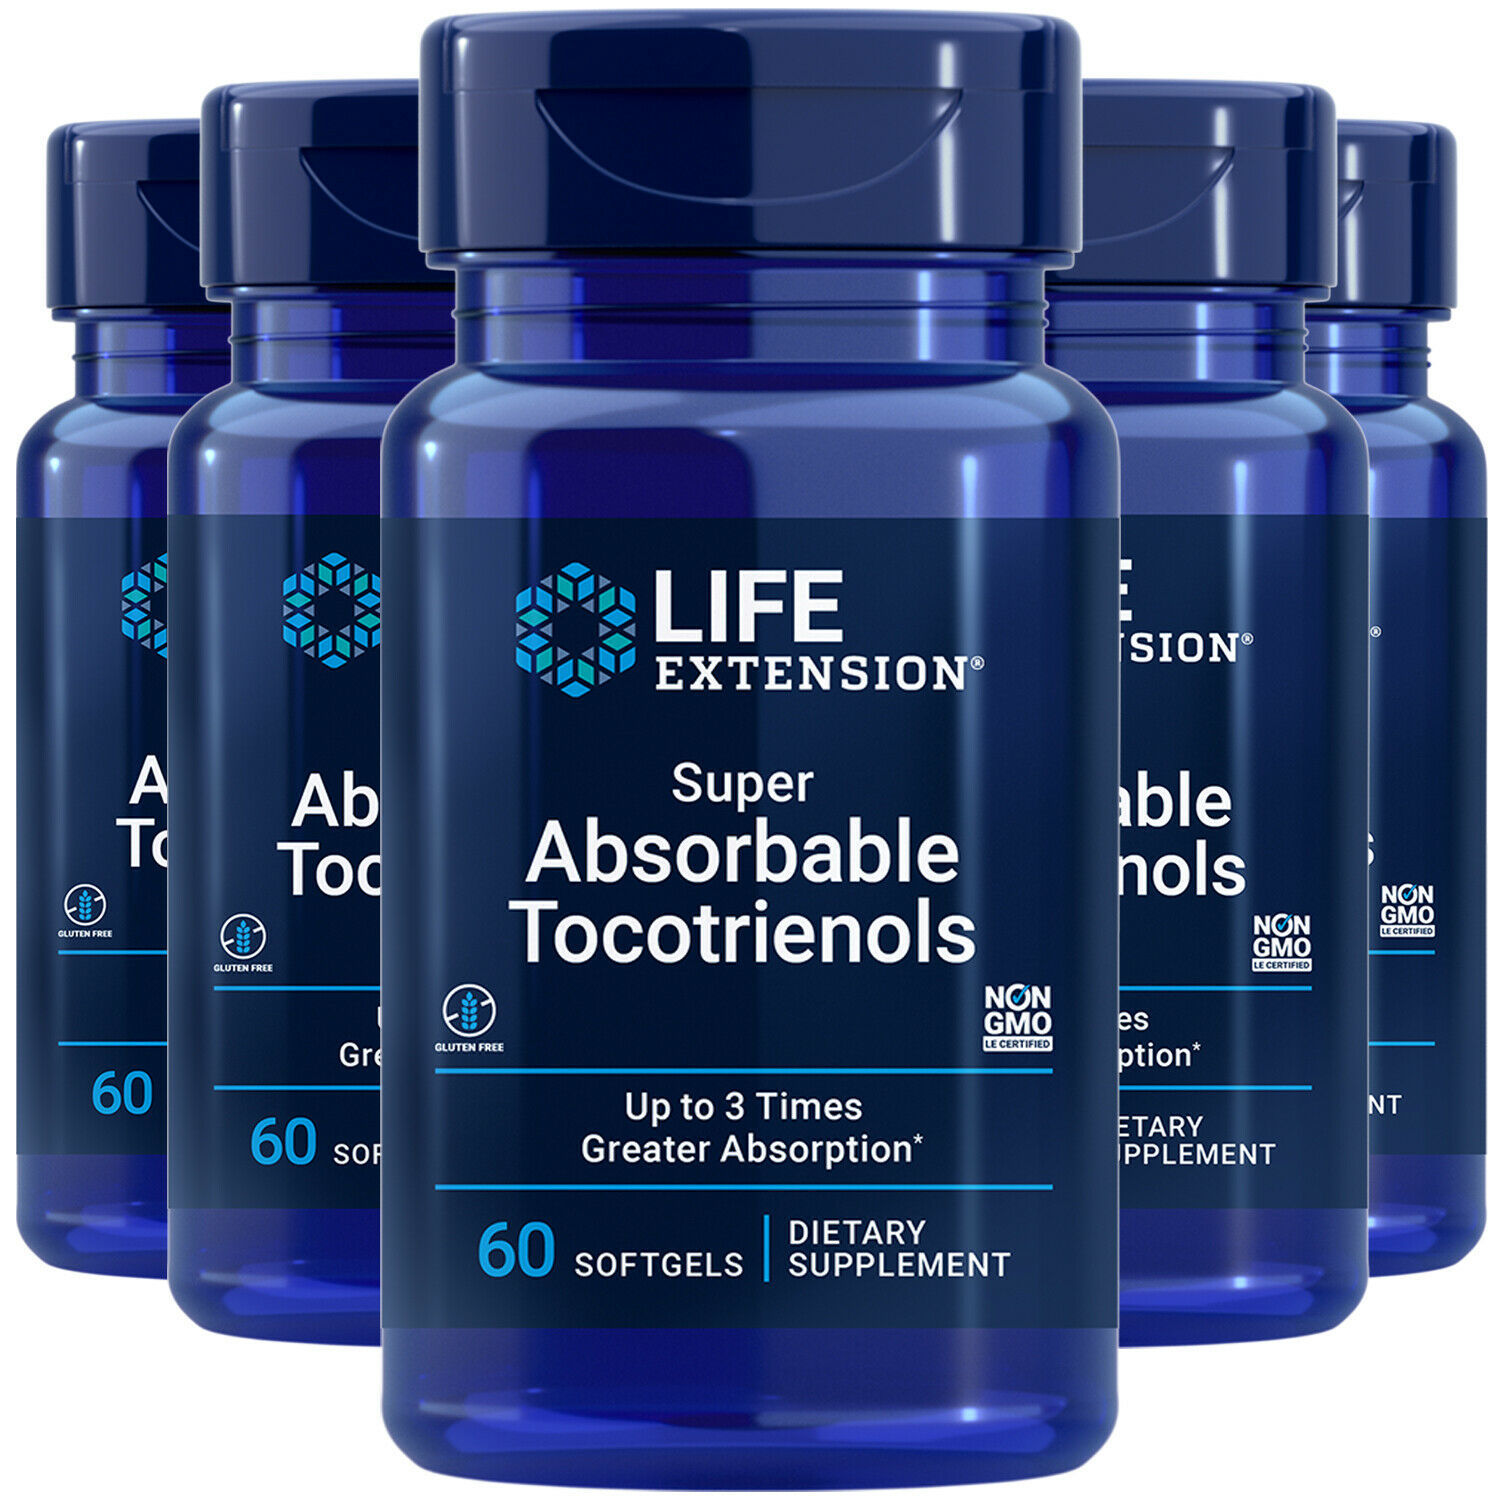 Super Absorbable Tocotrienols, 5X60gels Life Extension Most Absorbable Vitamin E